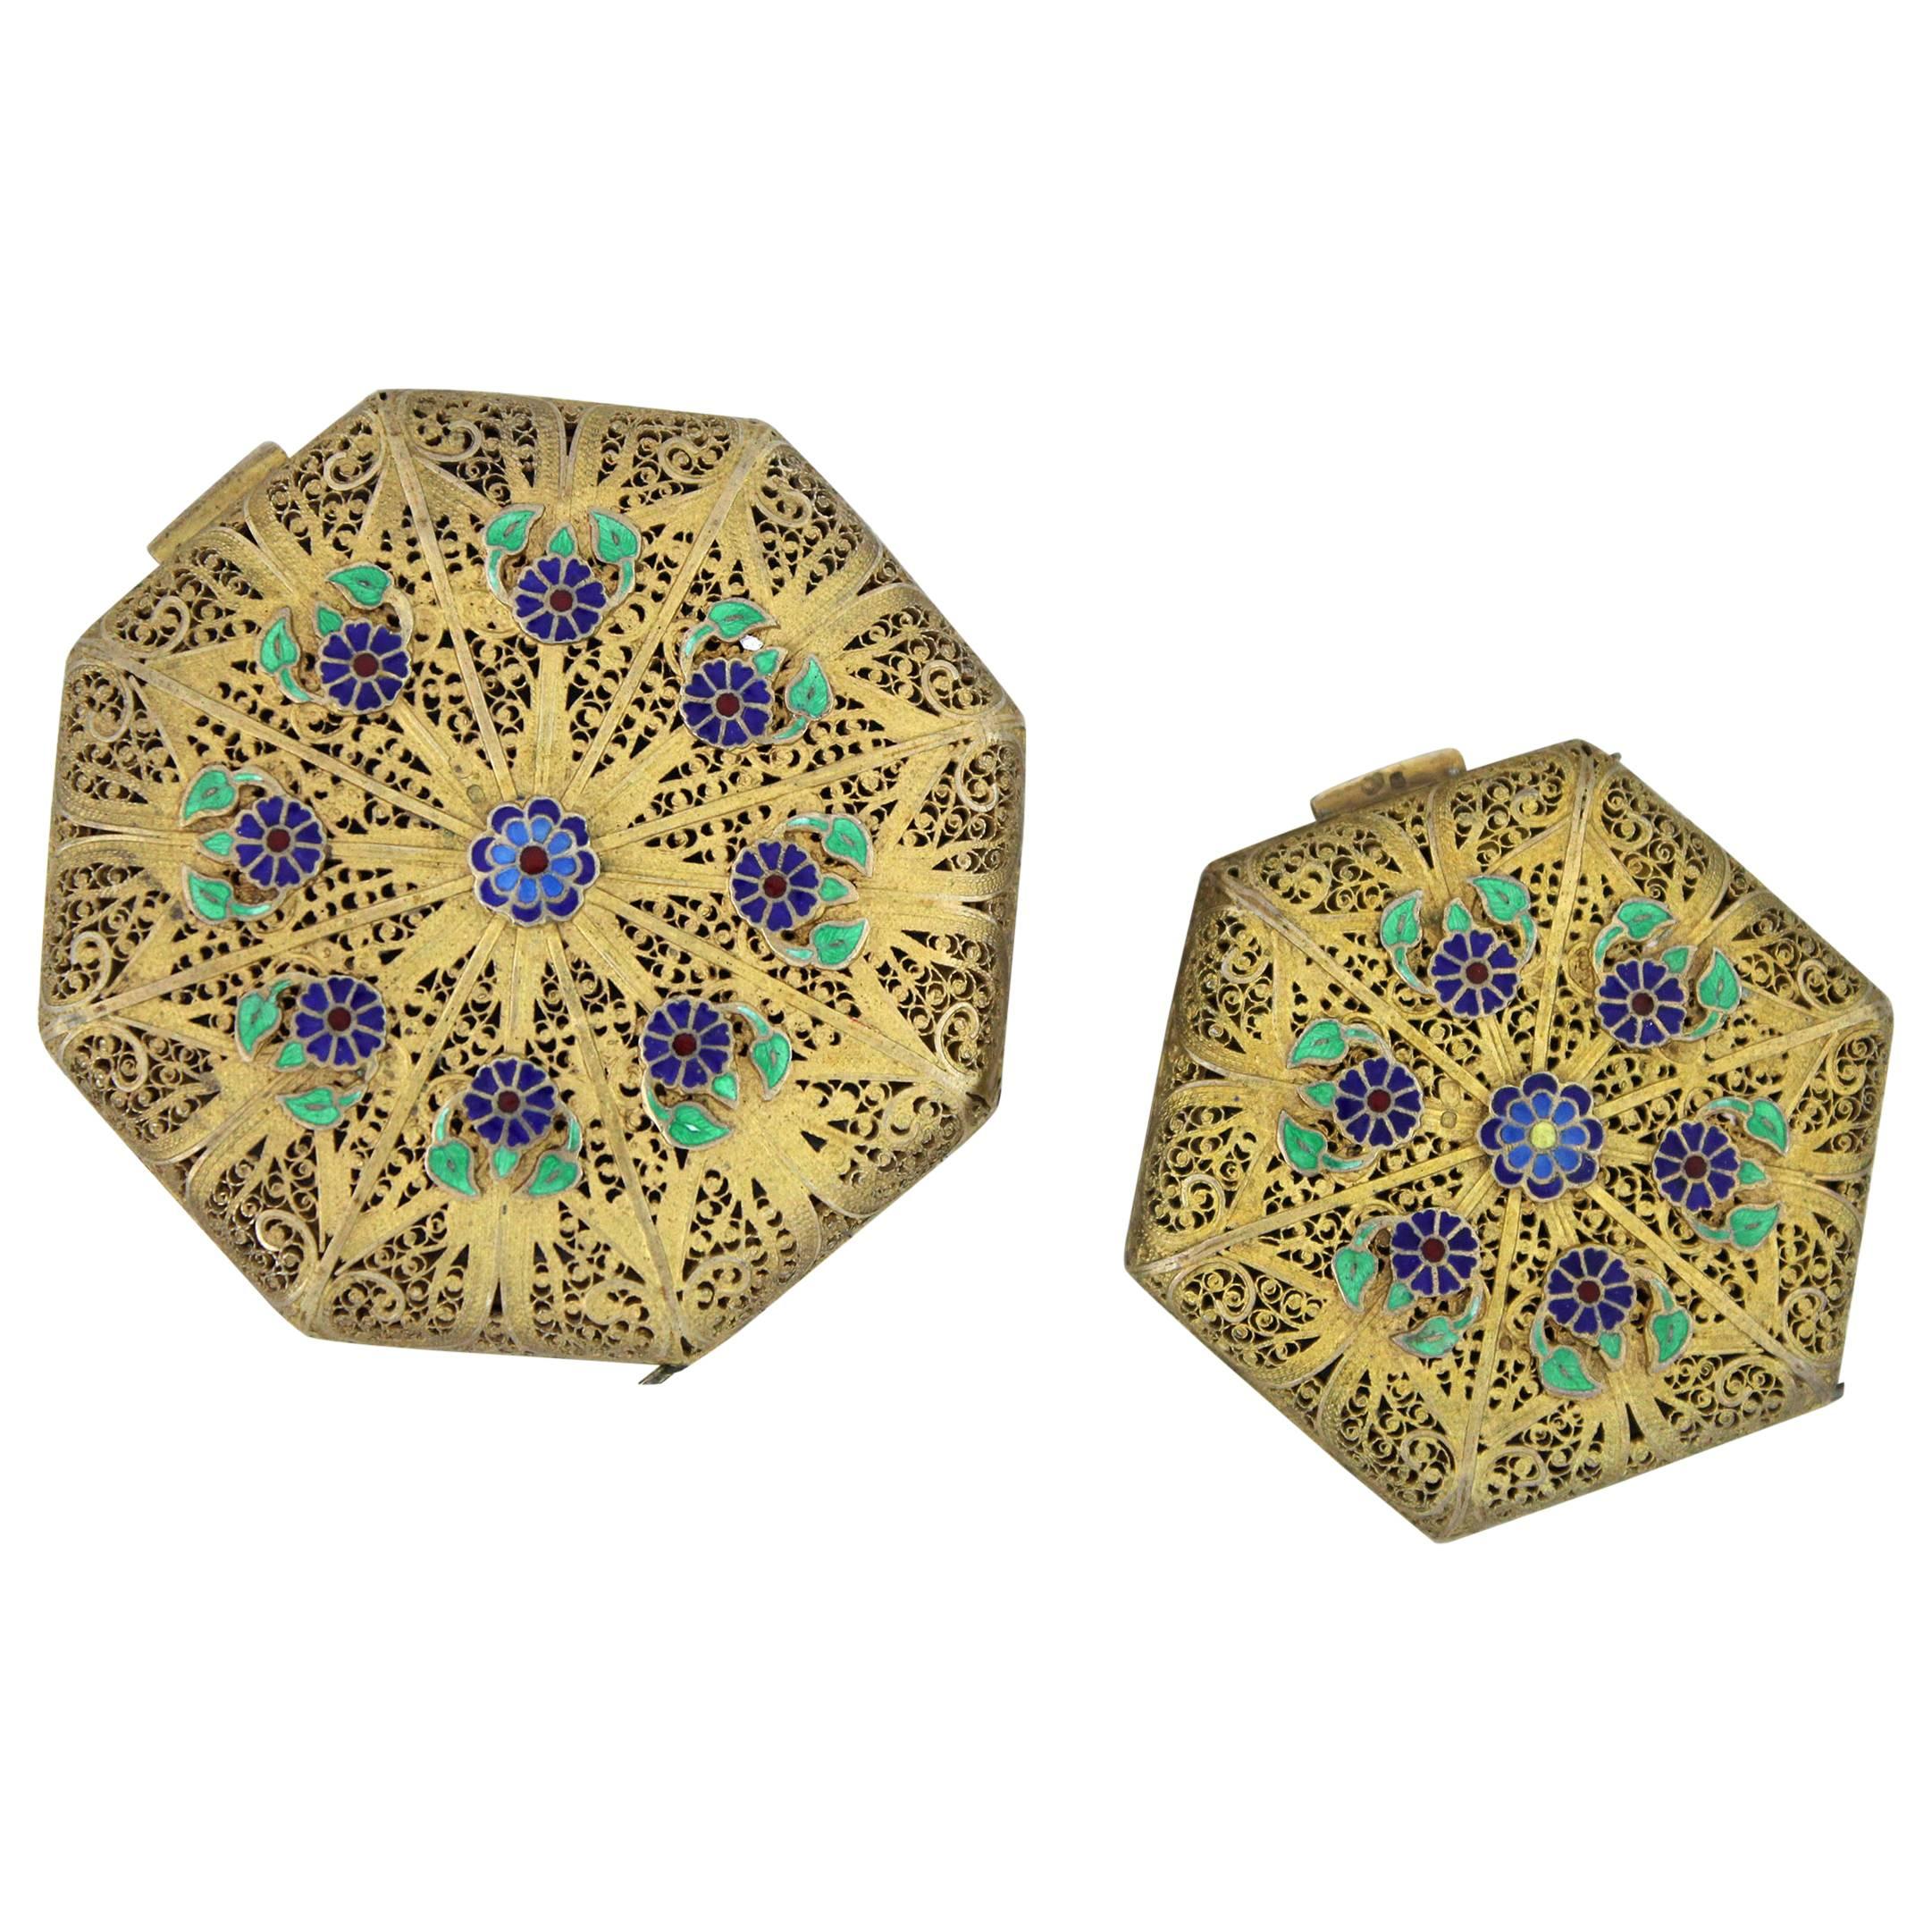 Pair of Octagon Compacts Vermeil Filigree Hallmarked & Enameled Flower Applique